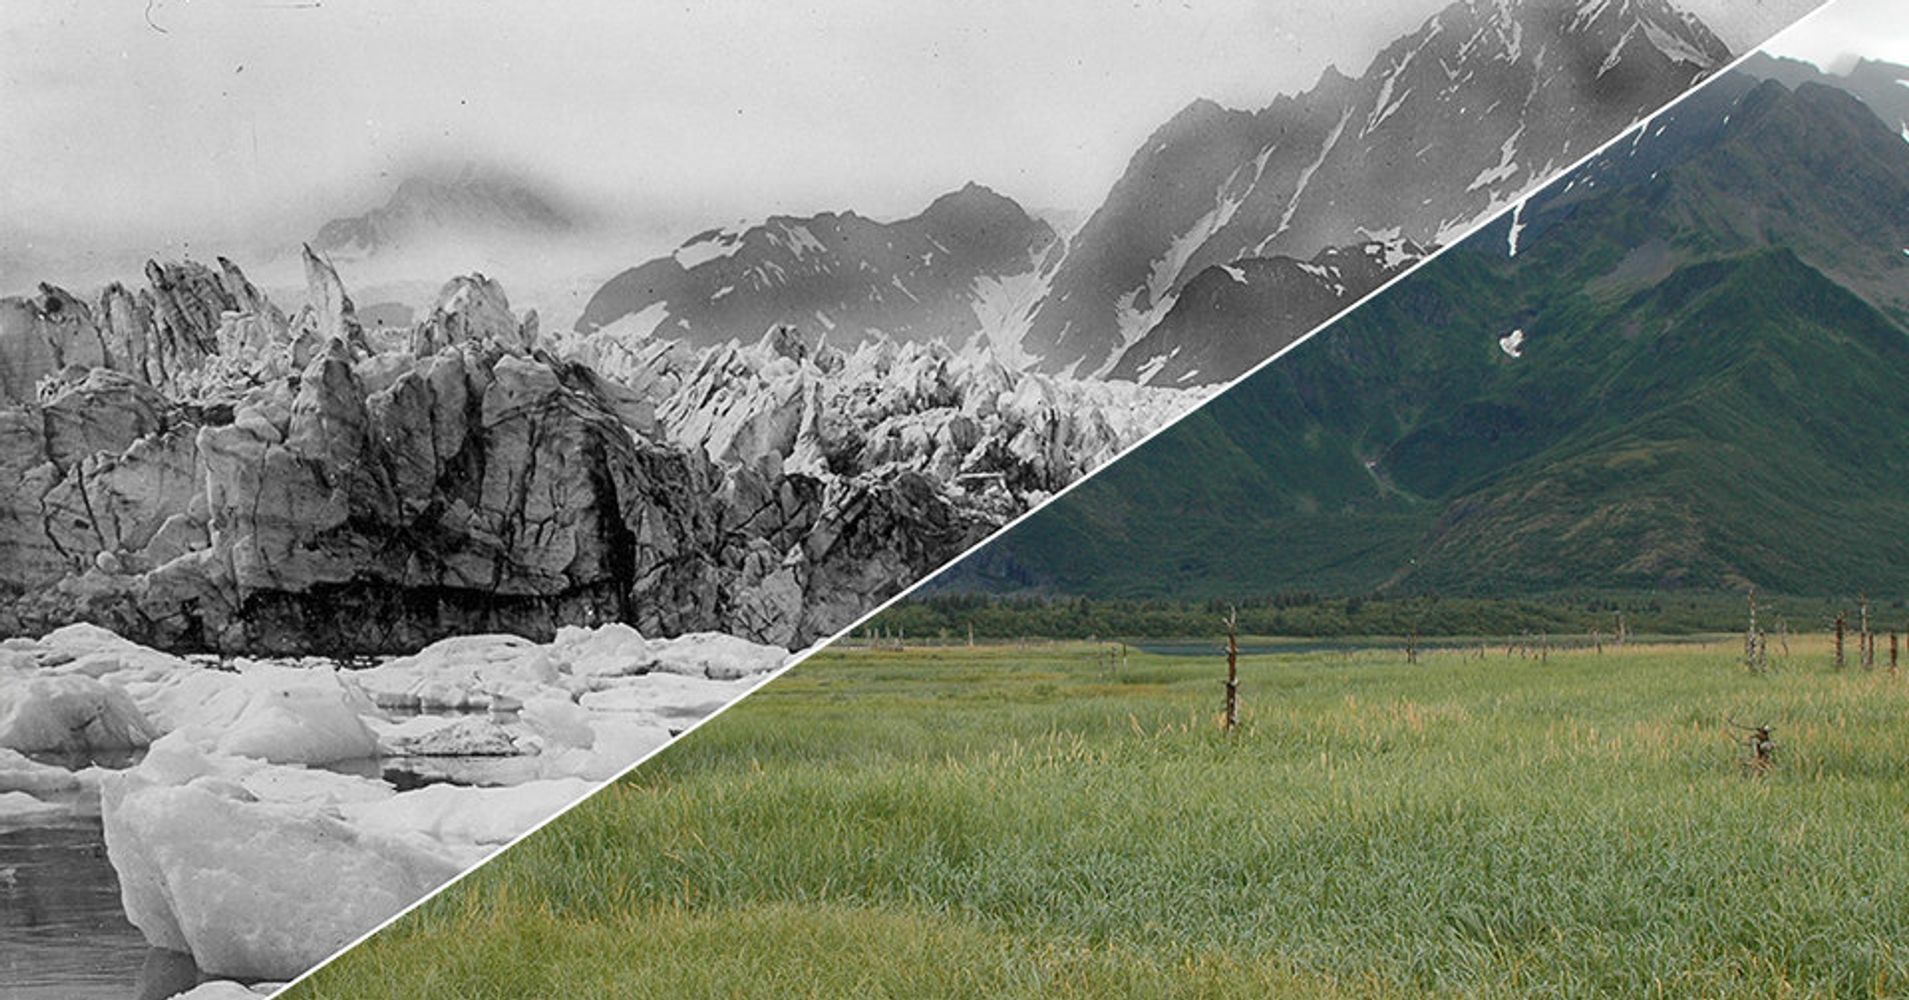 These Before And After Images Show The Startling Effects Of Climate